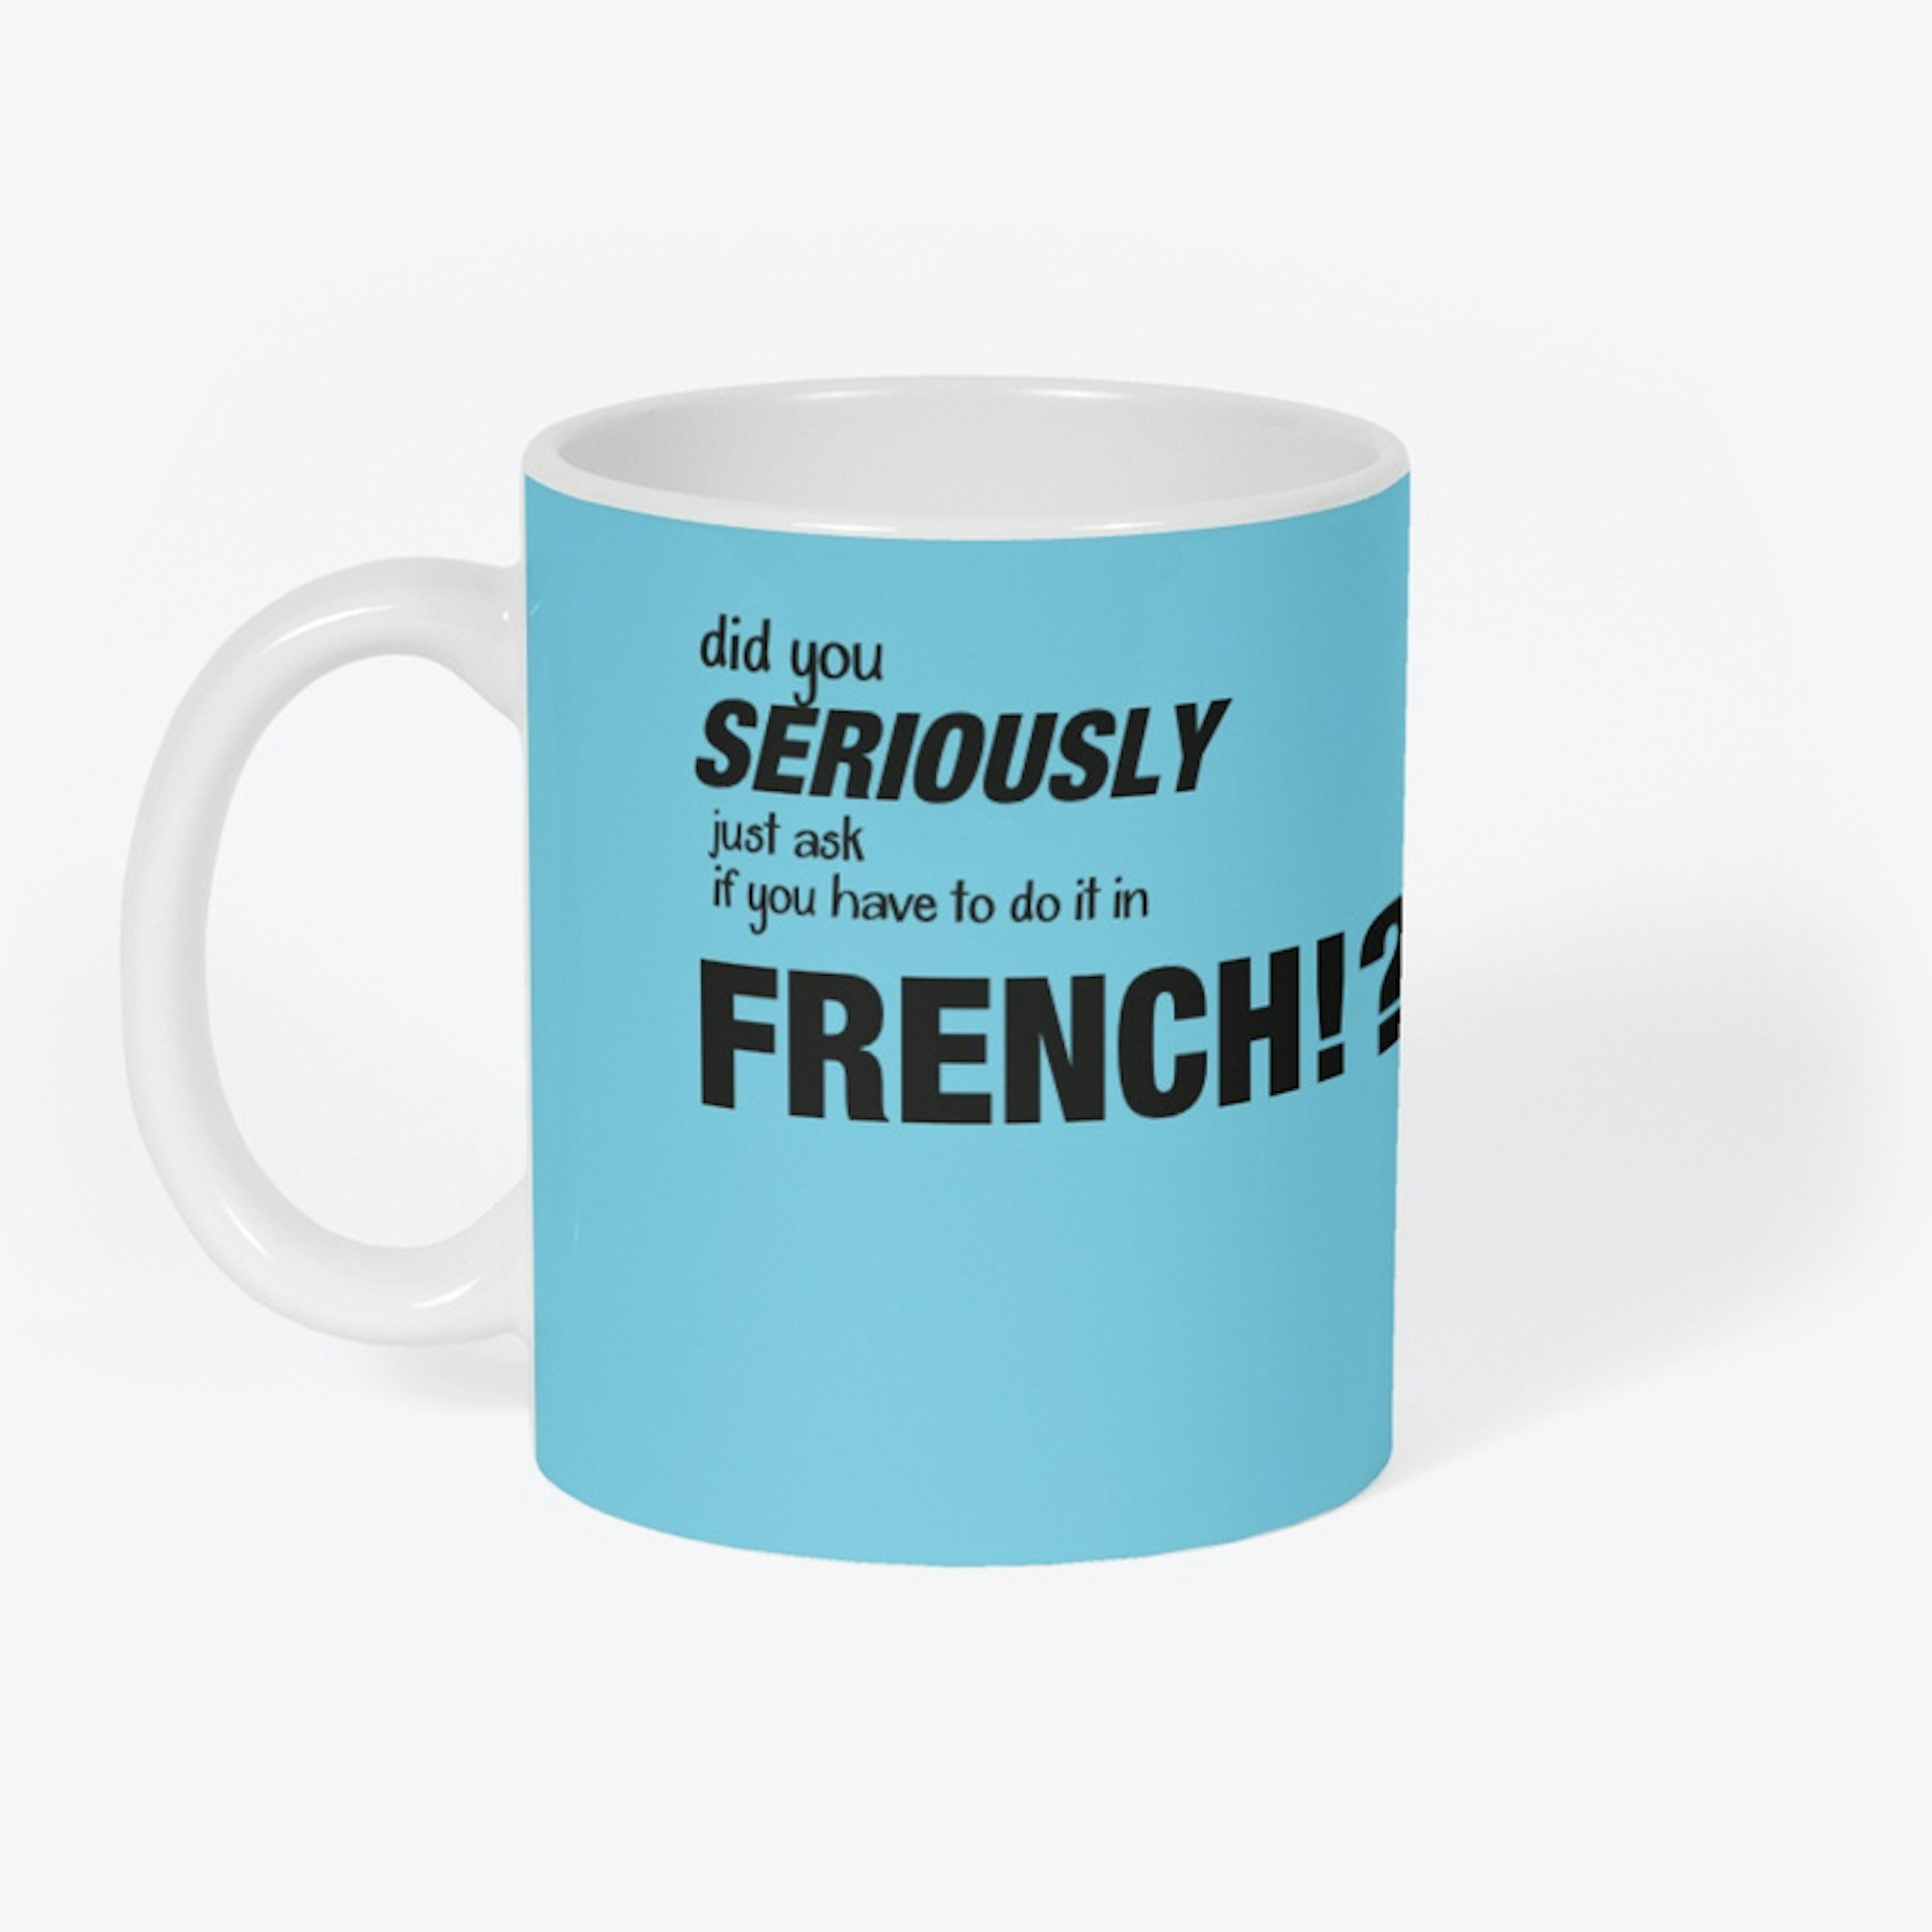 Did you seriously FRENCH